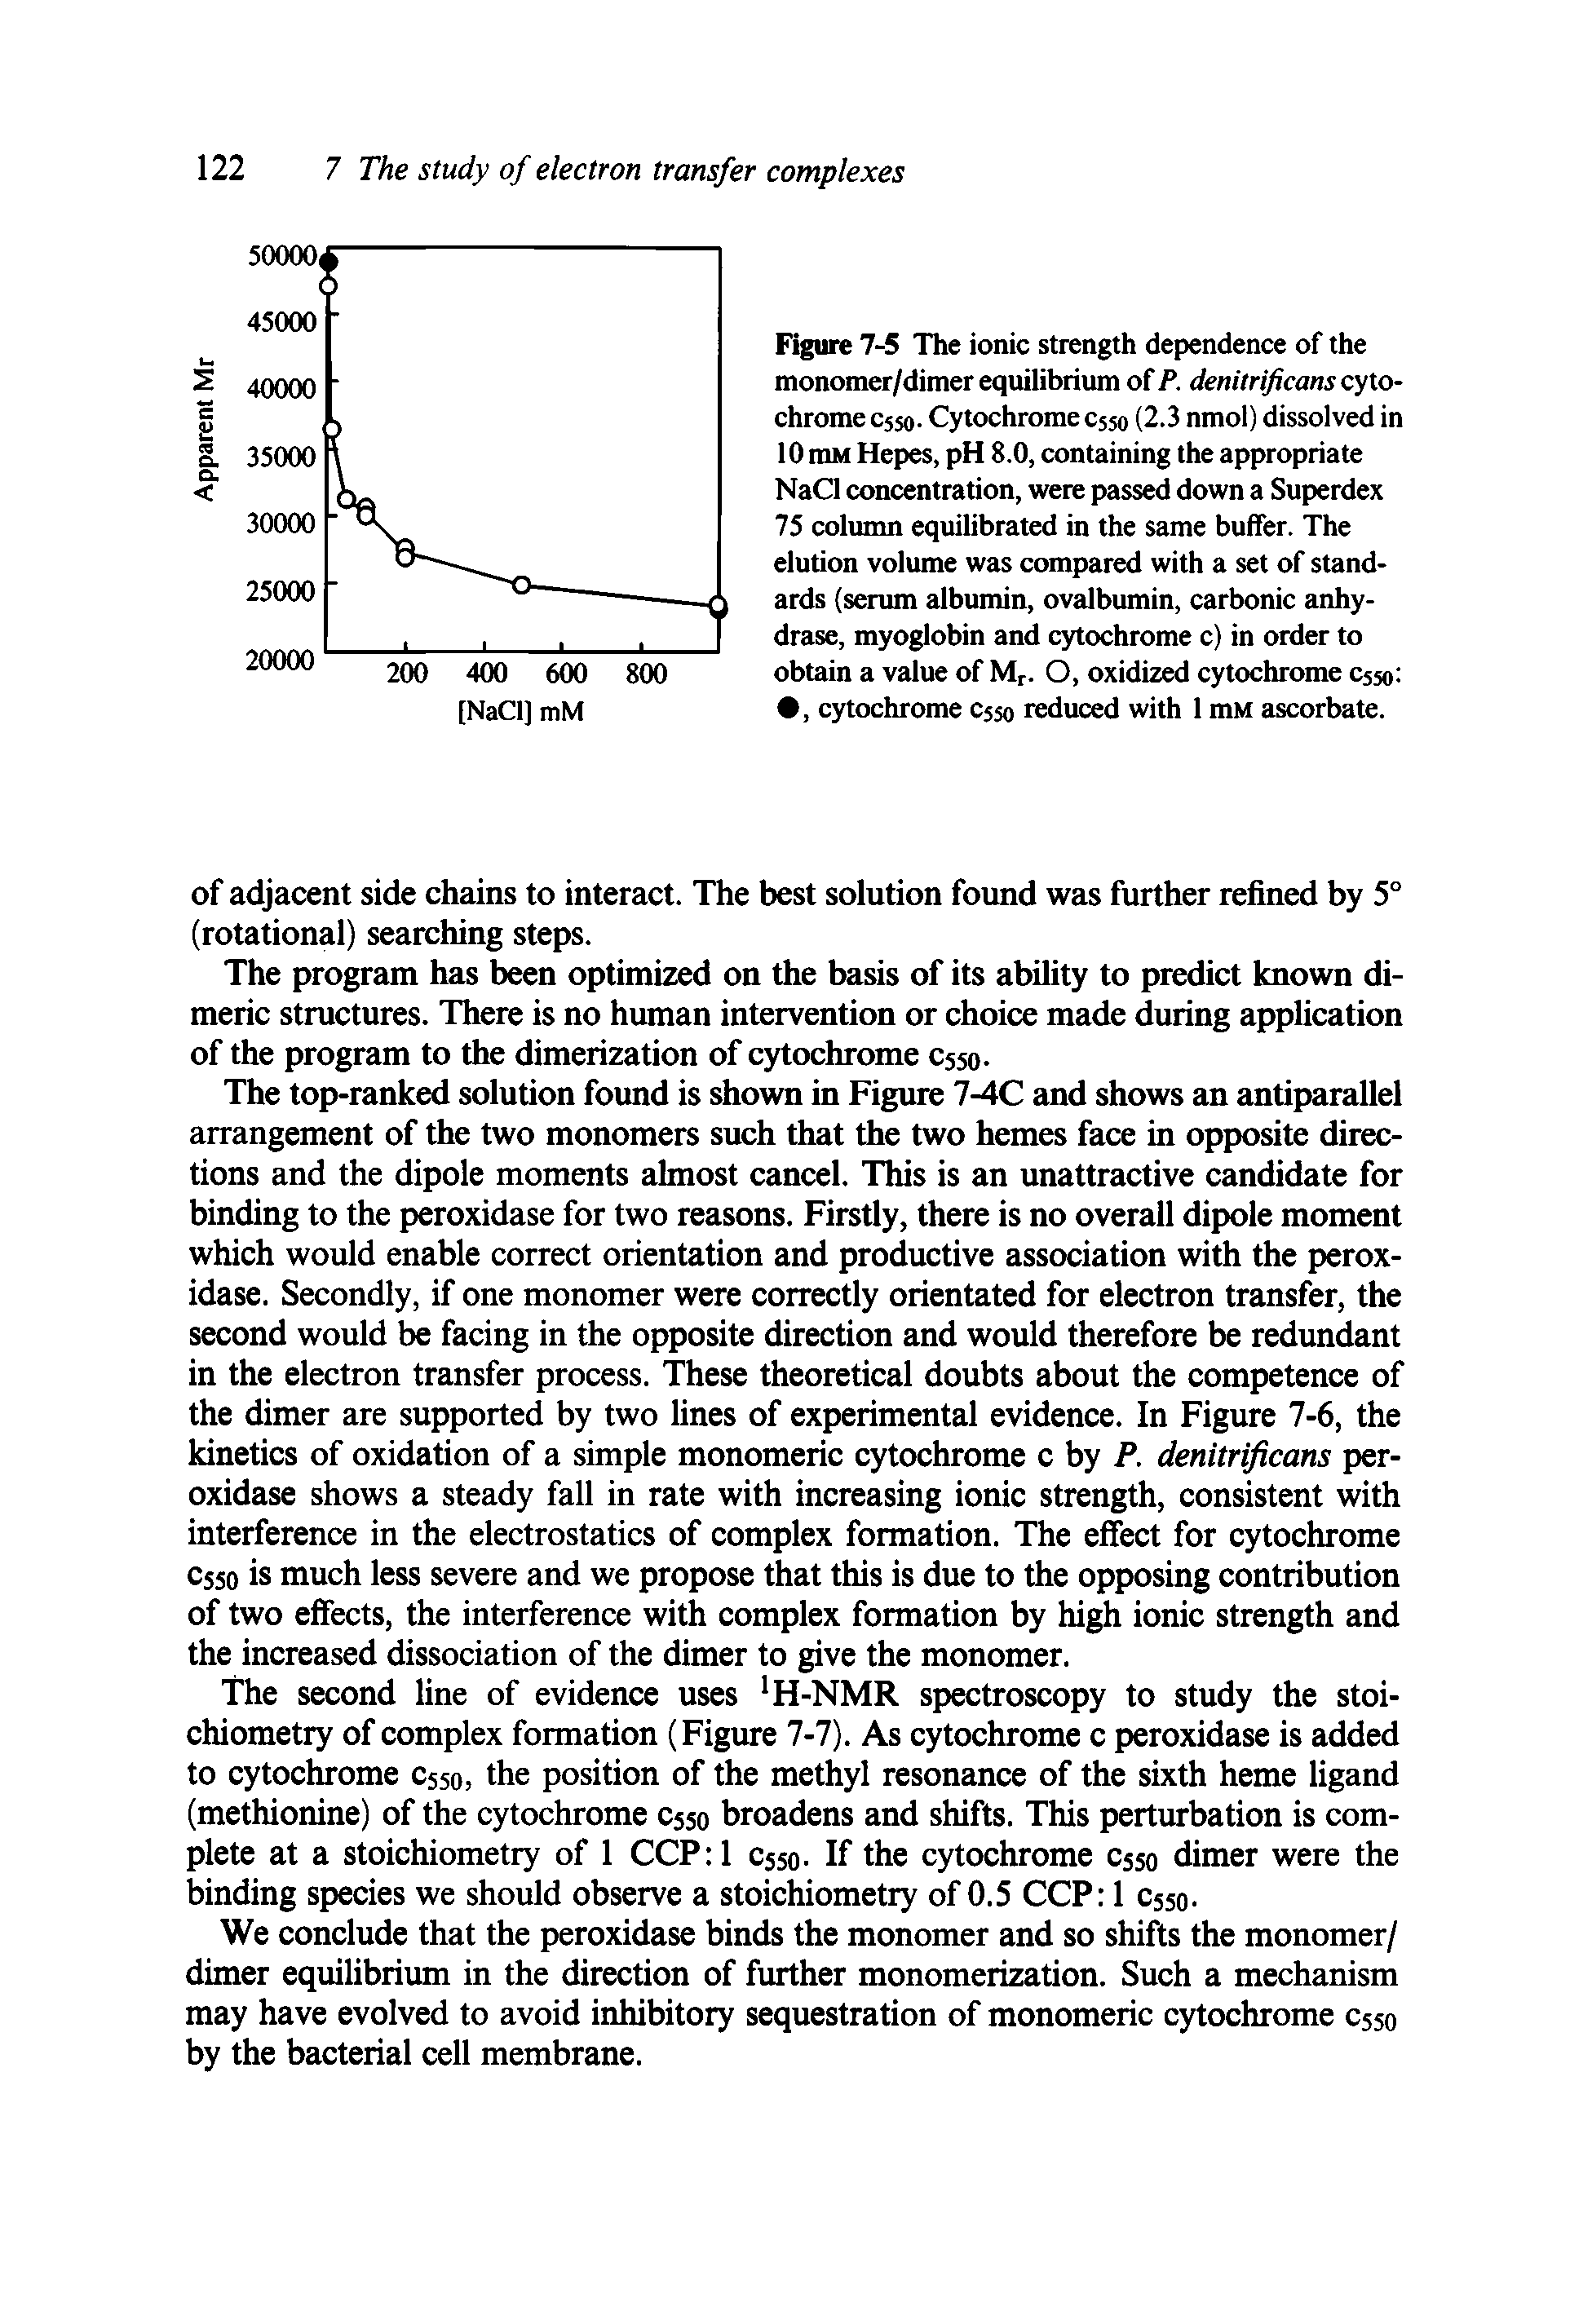 Figure 7-5 The ionic strength dependence of the monomer/dimer equilibrium of P. denitrificans cytochrome C550- Cytochrome csso (2.3 nmol) dissolved in 10 mM Hepes, pH 8.0, containing the appropriate NaCl concentration, were passed down a Superdex 75 column equilibrated in the same buffer. The elution volume was compared with a set of standards (serum albumin, ovalbumin, carbonic anhy-drase, myoglobin and cytochrome c) in order to obtain a value of Mr. O, oxidized cytochrome C550 , cytochrome C550 reduced with 1 mM ascorbate.